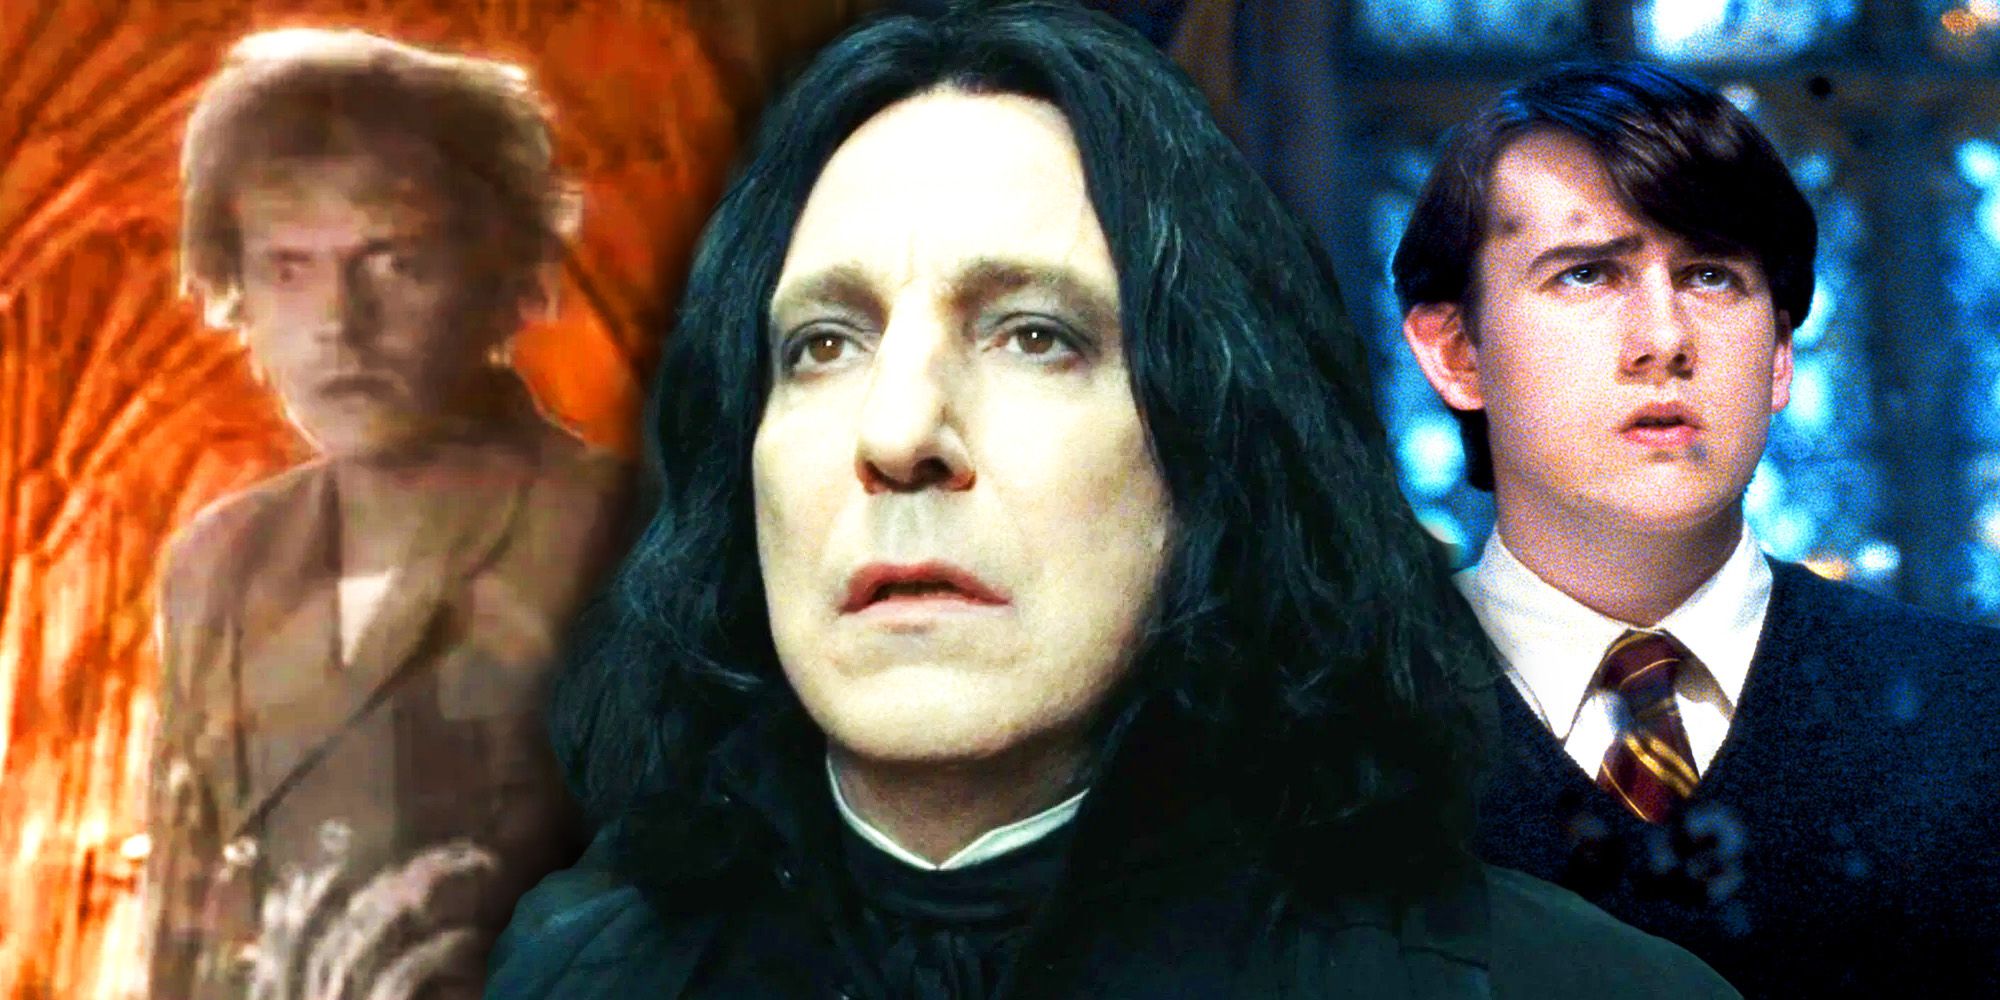 Peeves the Poltergeist, Severus Snape Looking Grim, and Neville Longbottom from Harry Potter